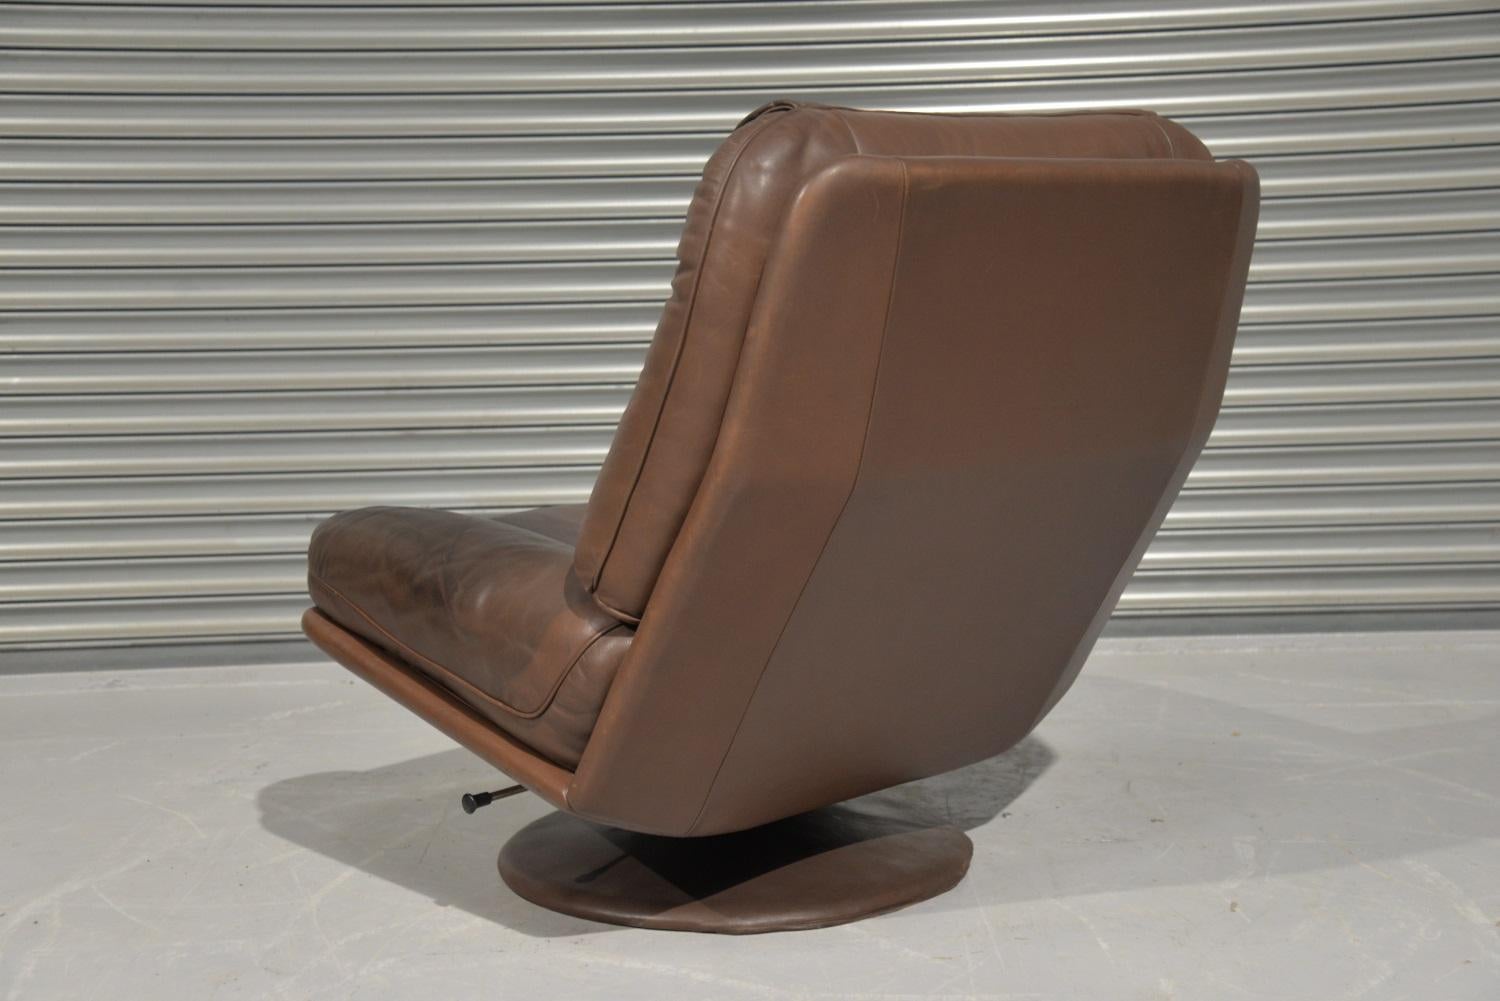 Vintage De Sede Leather Swivel Armchair and Ottoman, Switzerland, 1980s For Sale 2